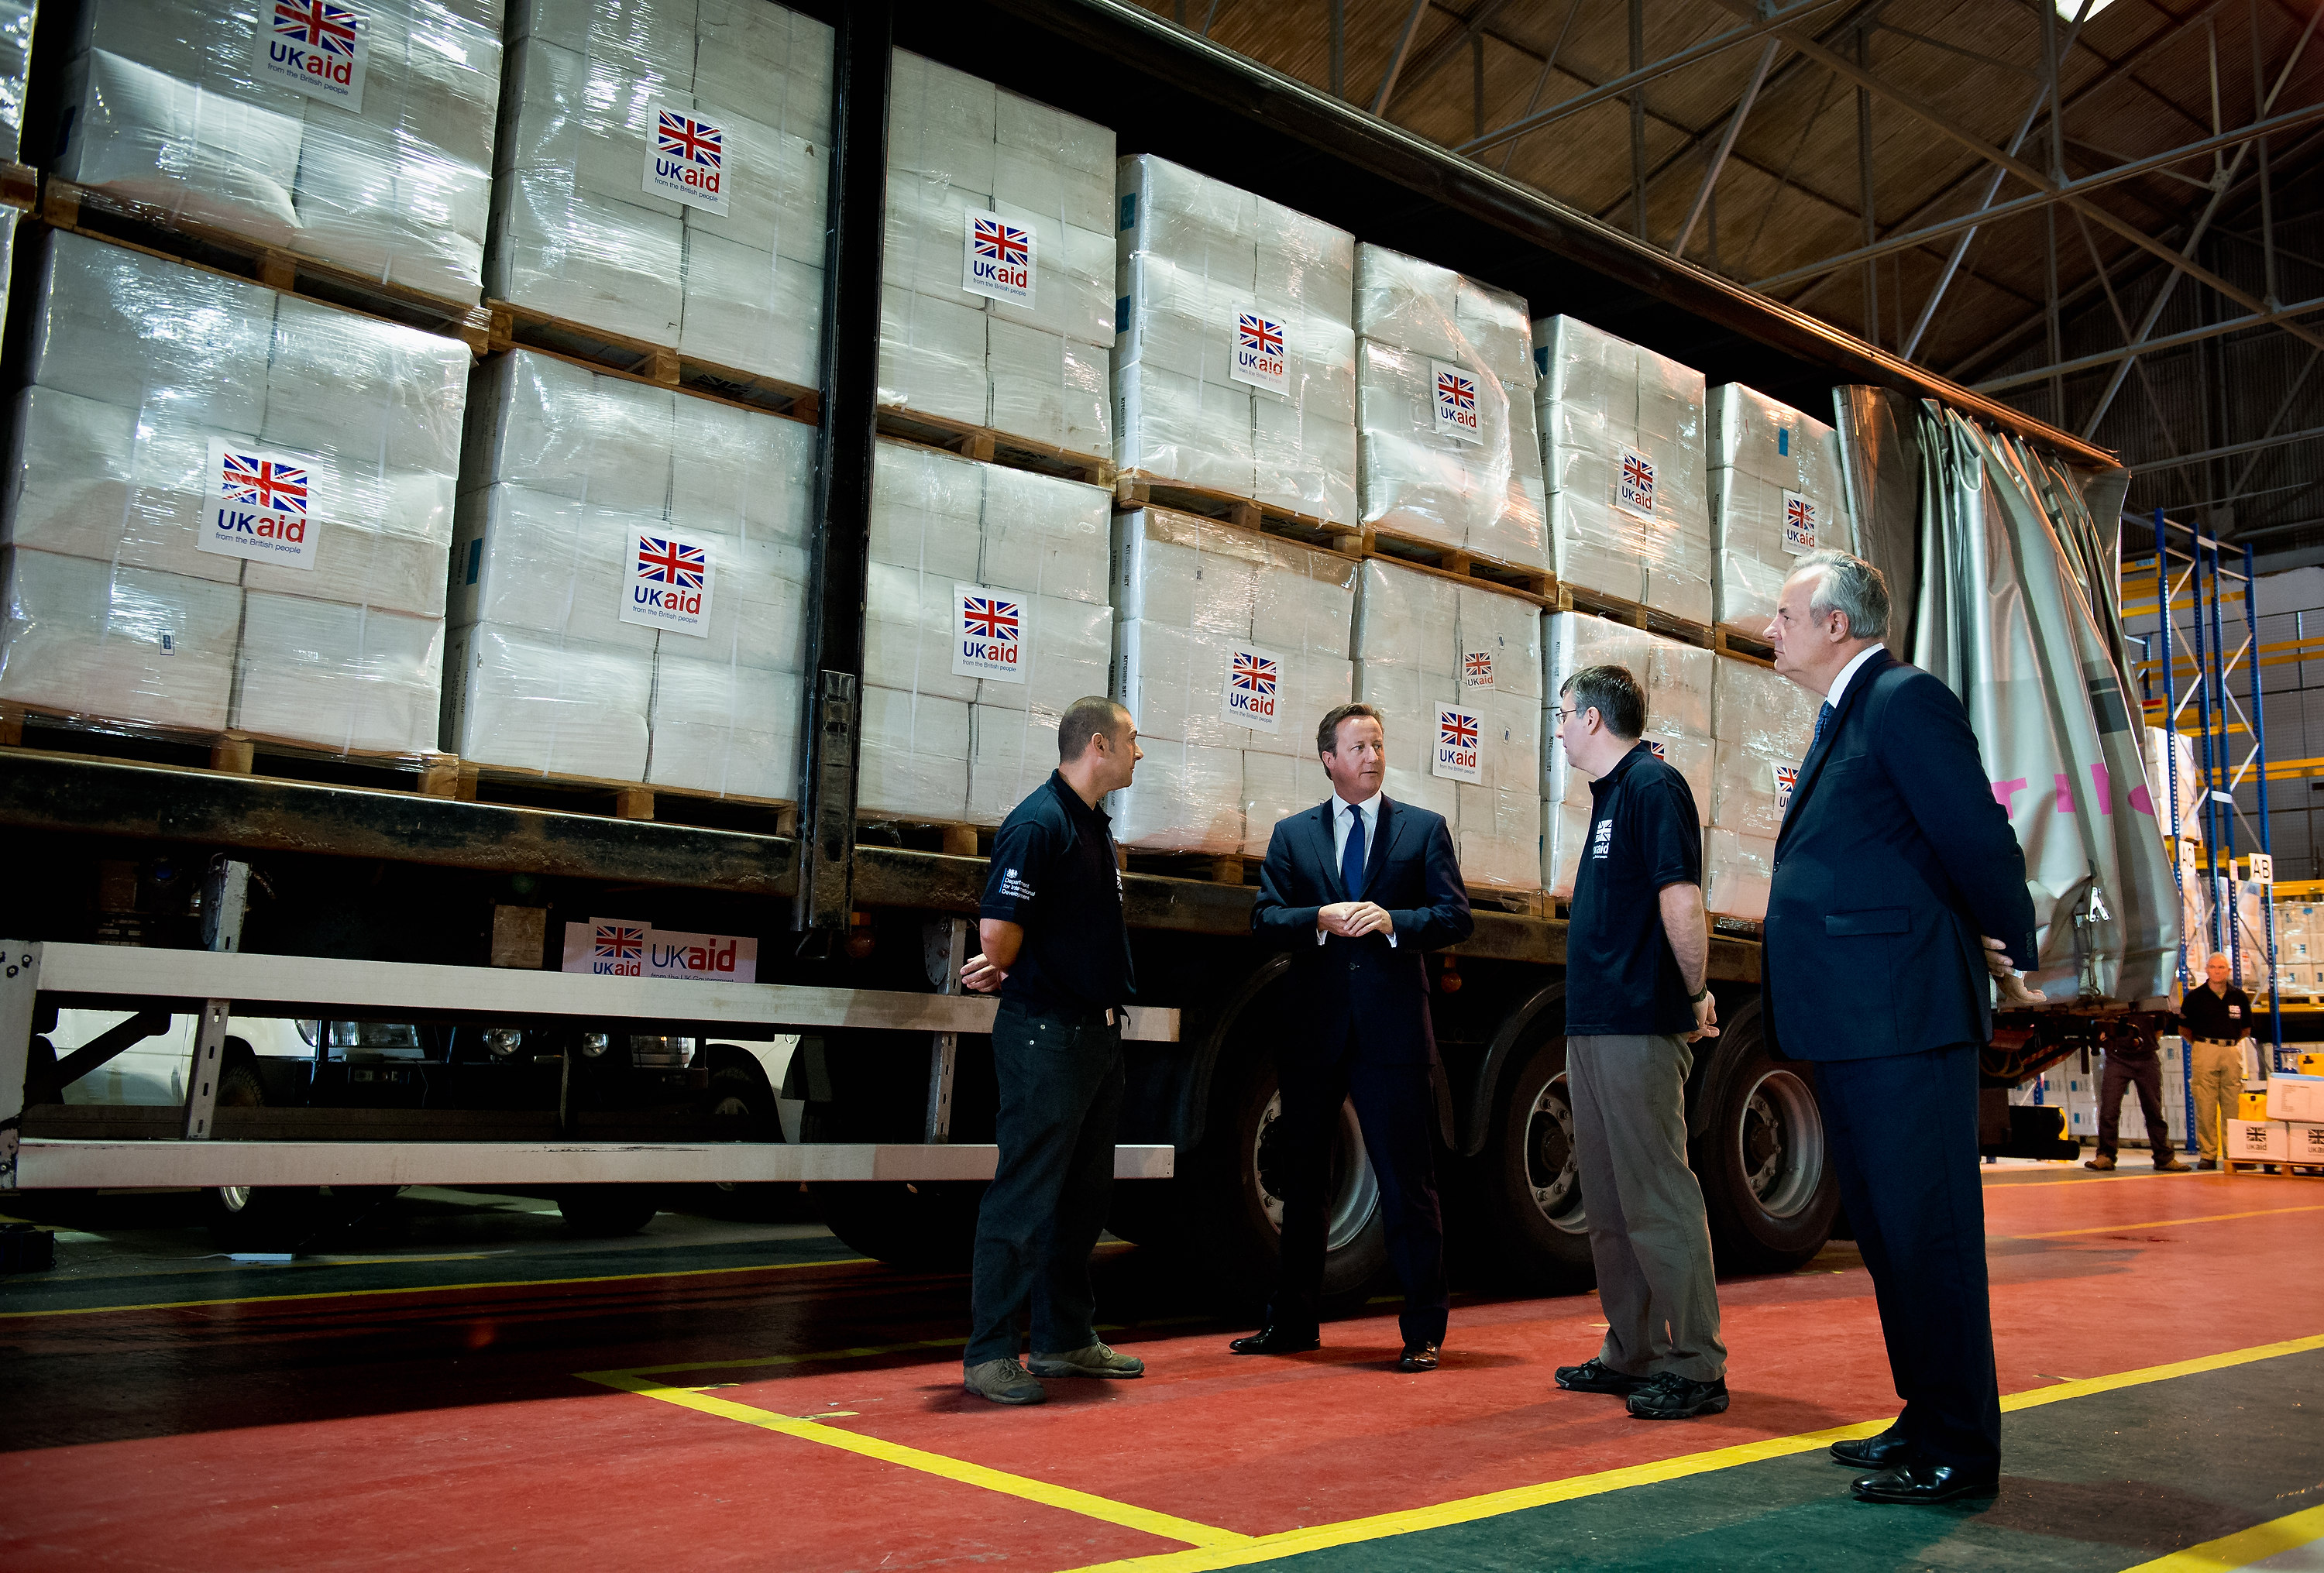 UK PM David Cameron visits a 'UK AID' facility in Wiltshire. He stands in a warehouse with boxes marked UK AID.